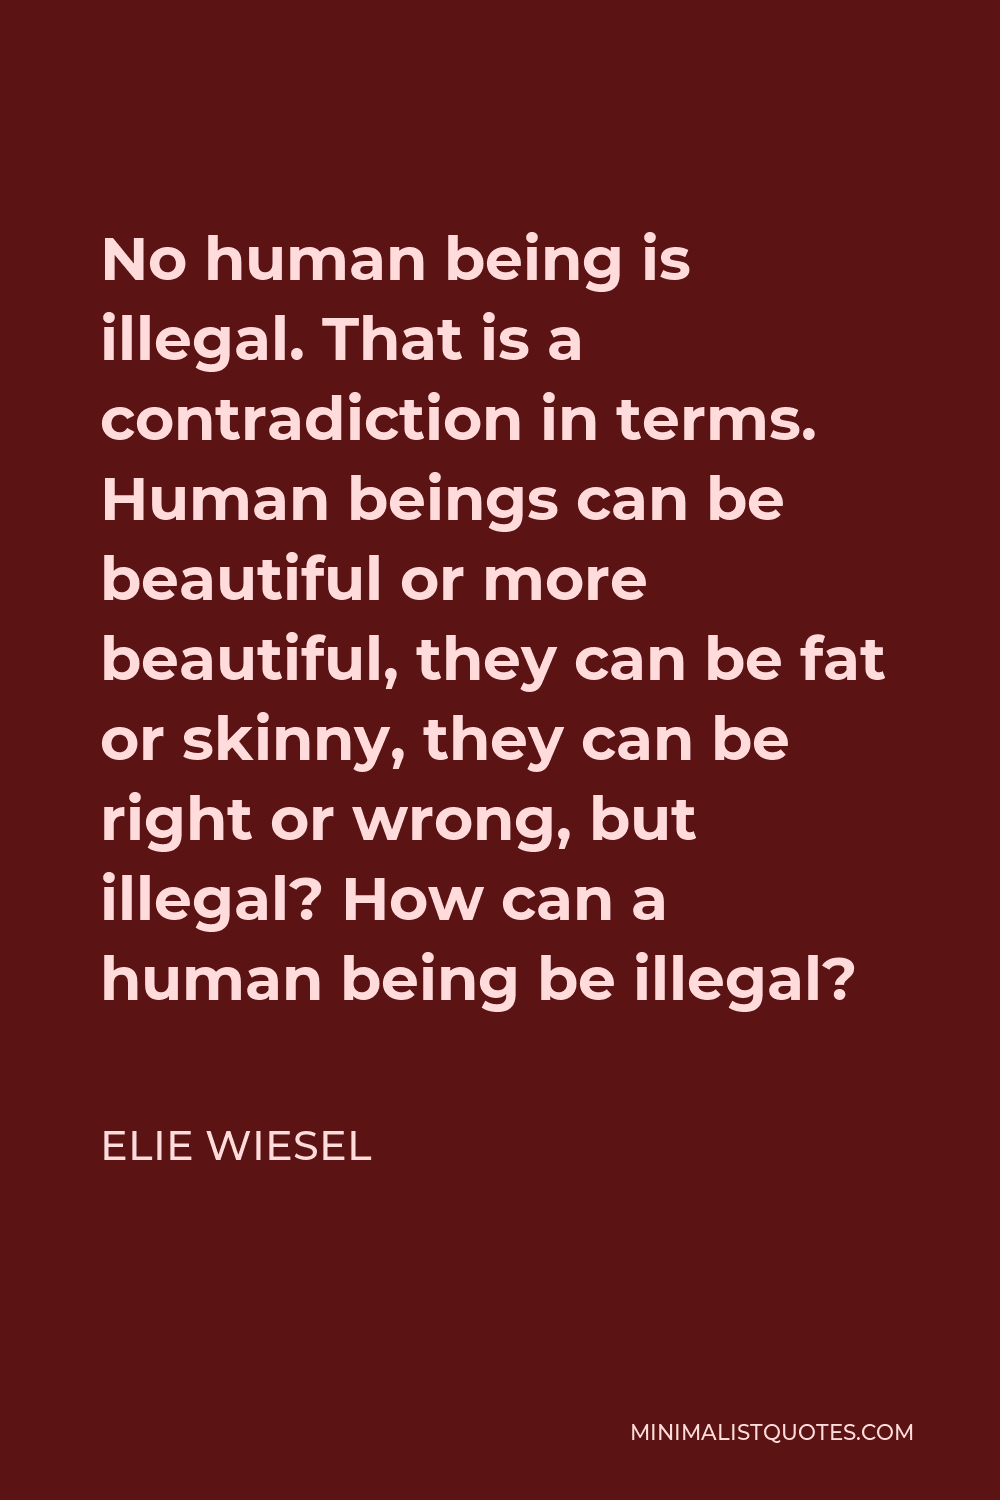 Elie Wiesel Quote - No human being is illegal. That is a contradiction in terms. Human beings can be beautiful or more beautiful, they can be fat or skinny, they can be right or wrong, but illegal? How can a human being be illegal?